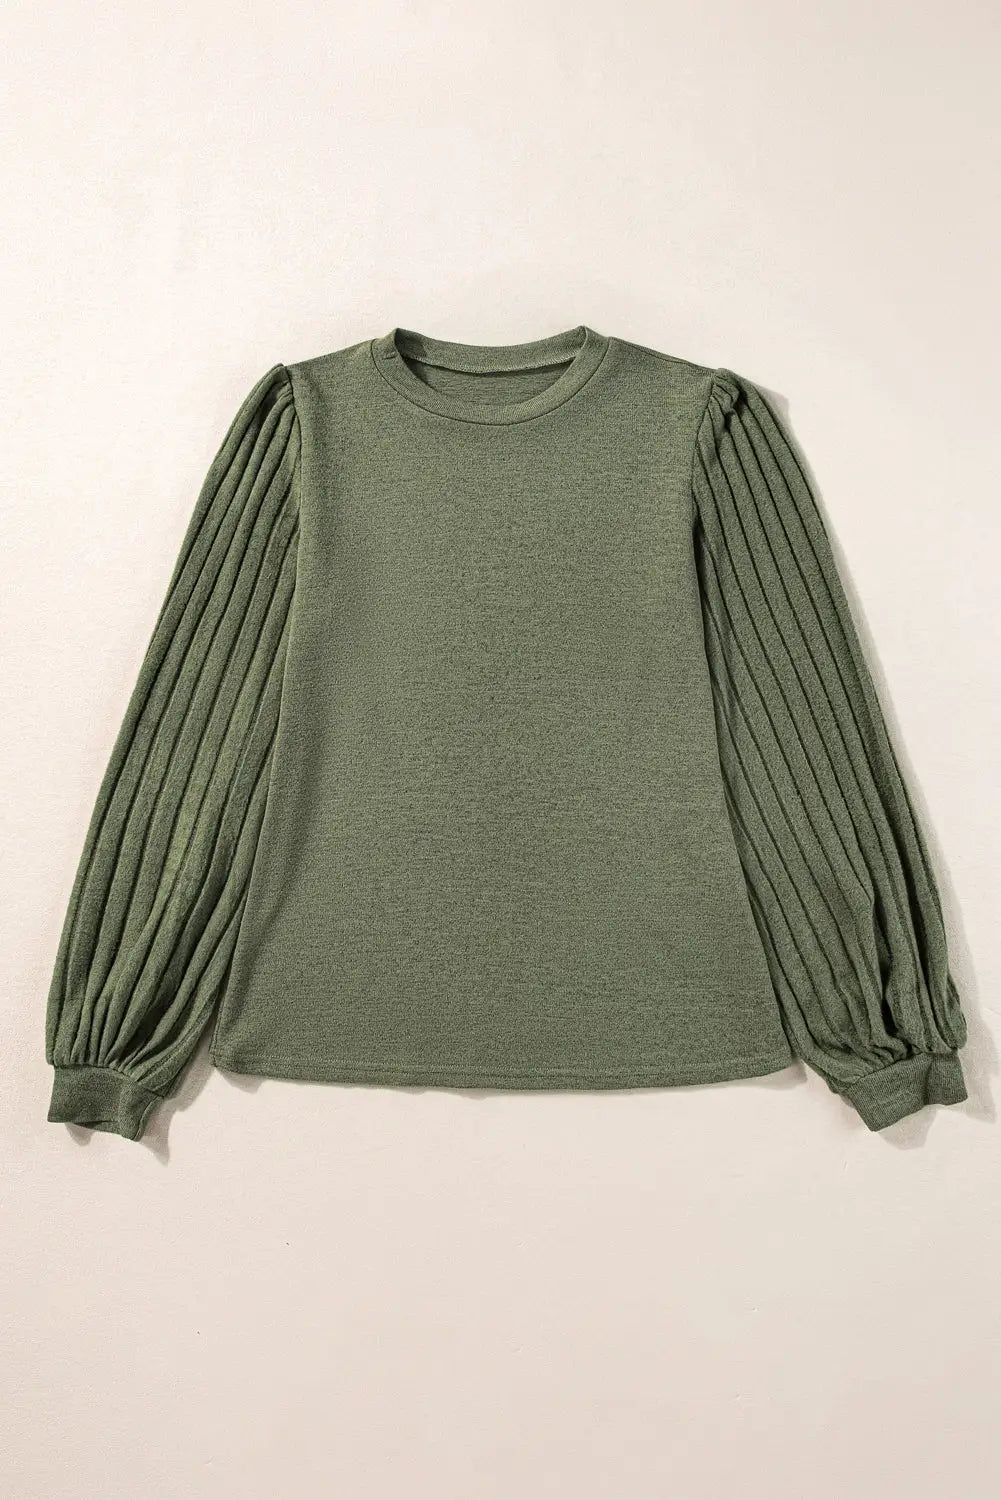 Jungle green contrast ribbed bishop sleeve top - tops